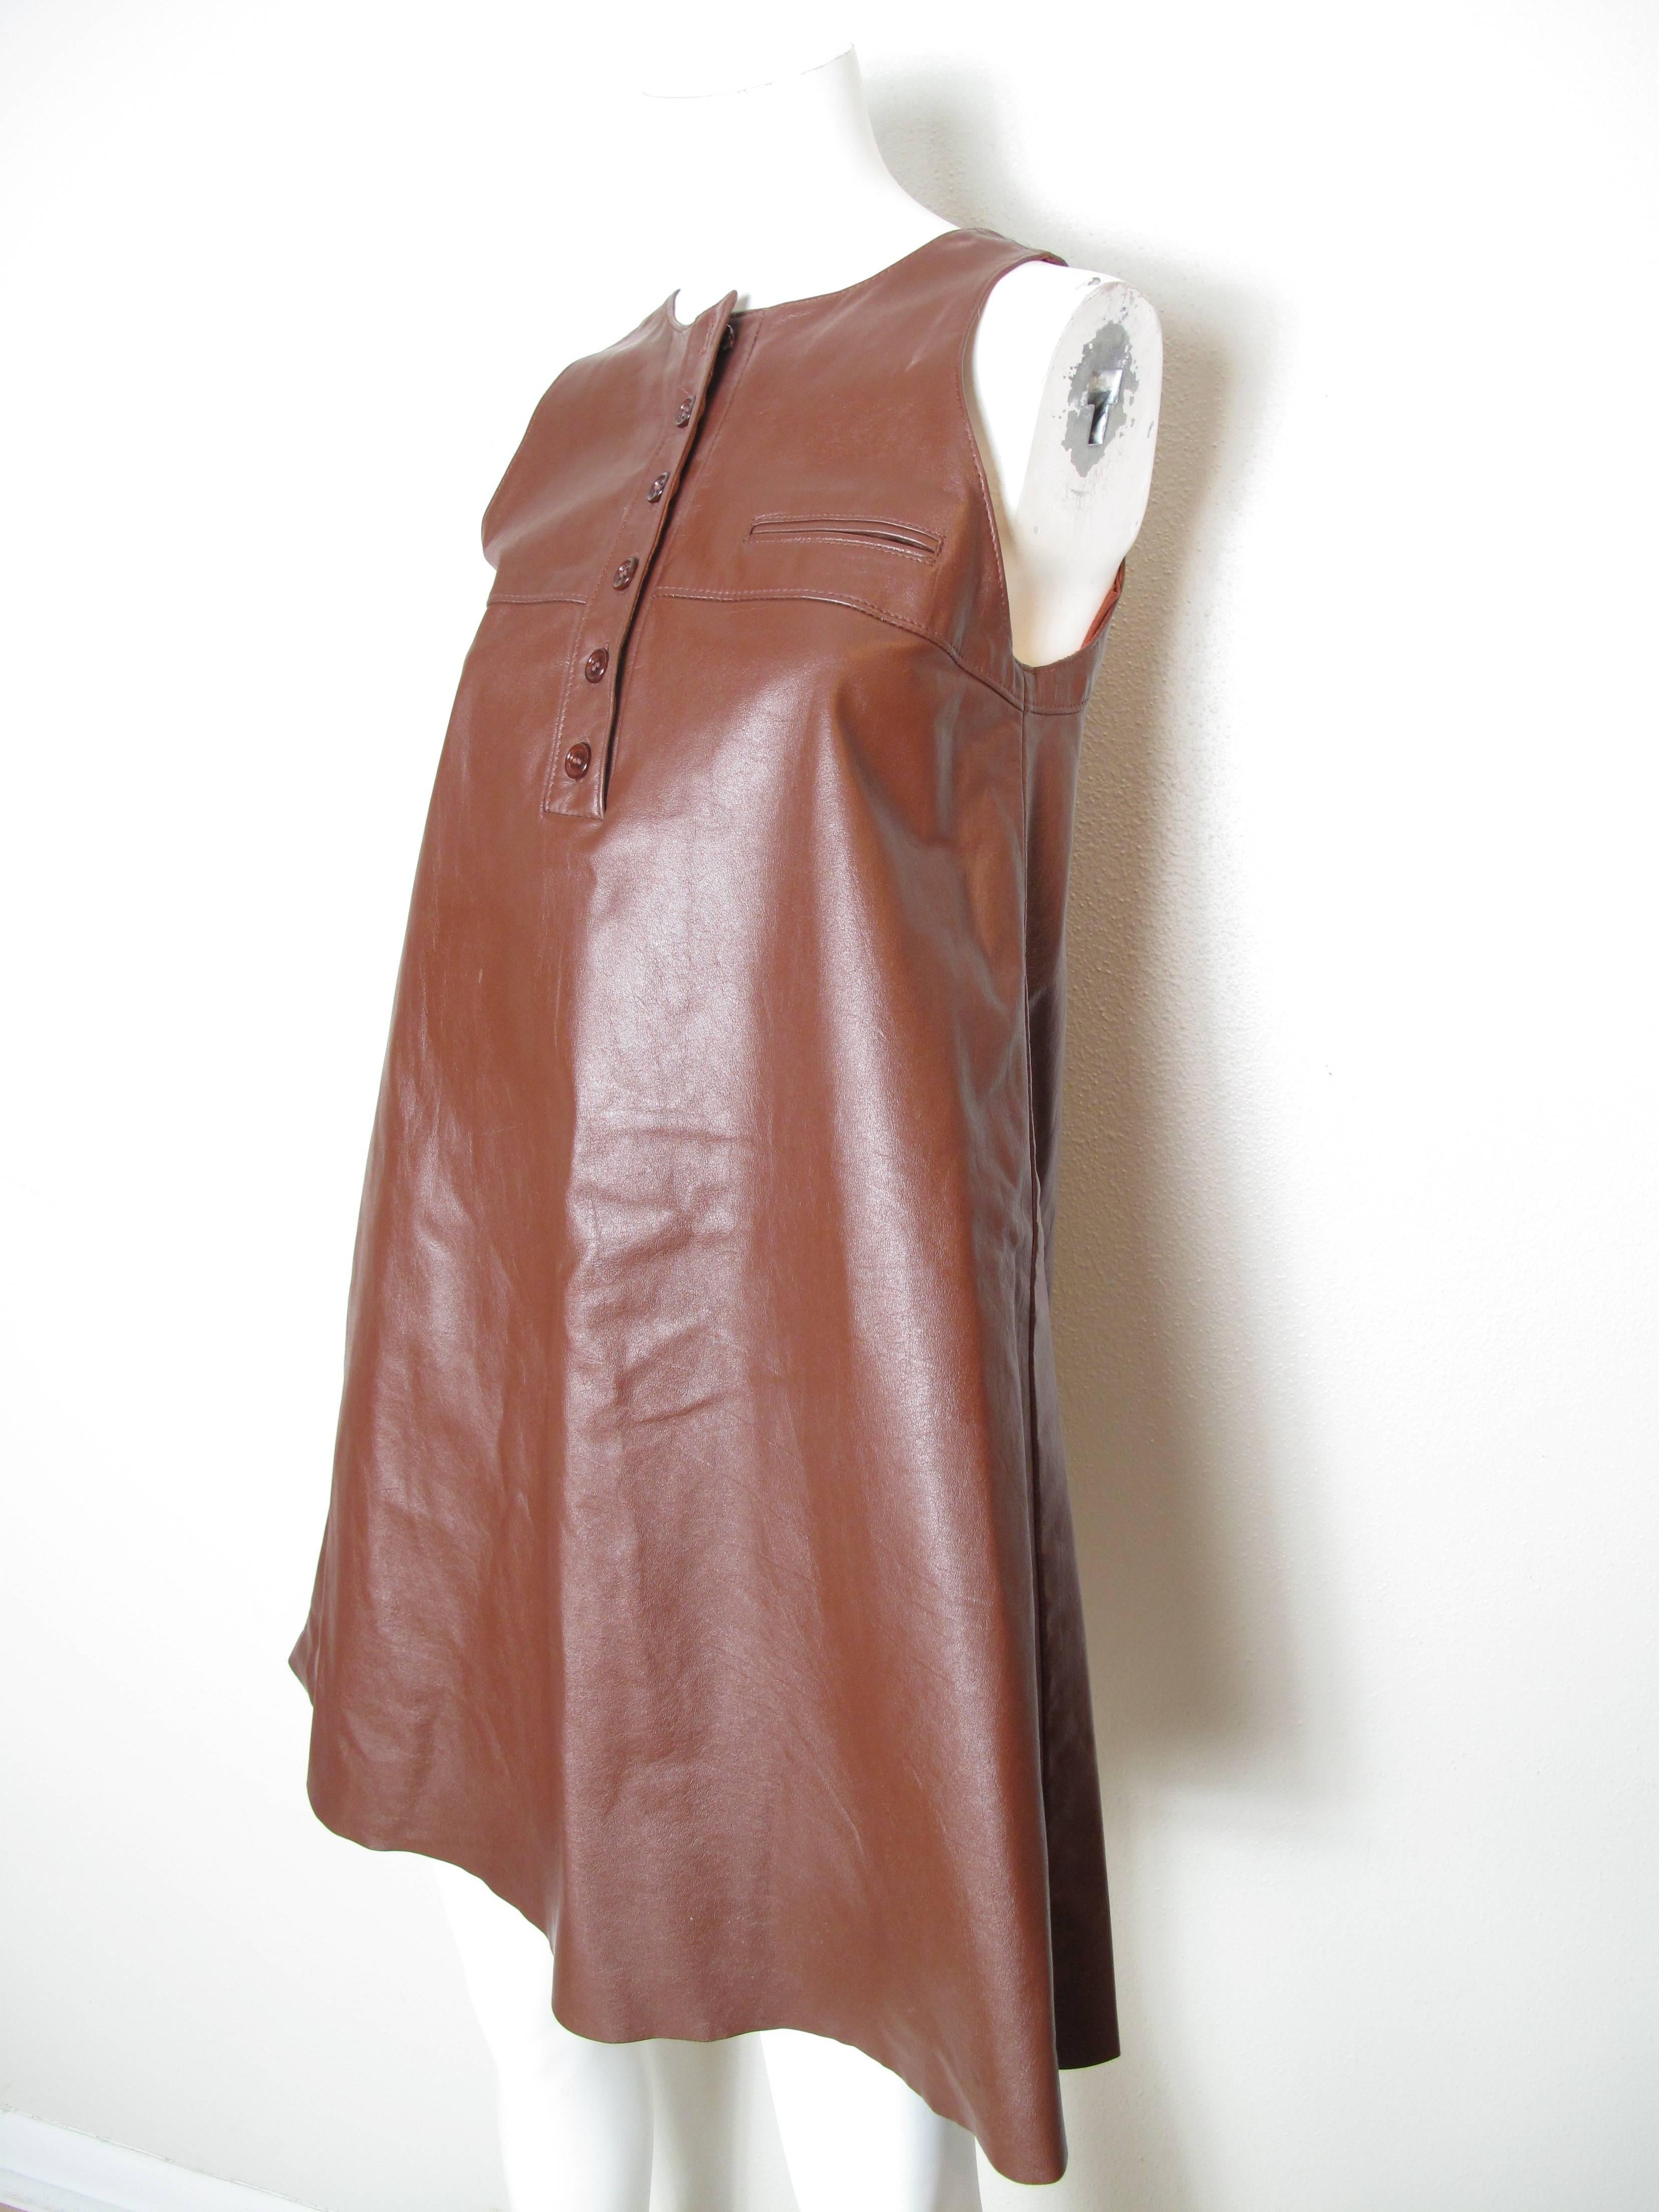 1970s Anne Klein brown leather jumper dress with small pocket and buttons at neckline.  Condition: Very good, some white spots, see photos.  Size 4

We accept returns for refund, please see our terms.  We offer free ground shipping within the US.